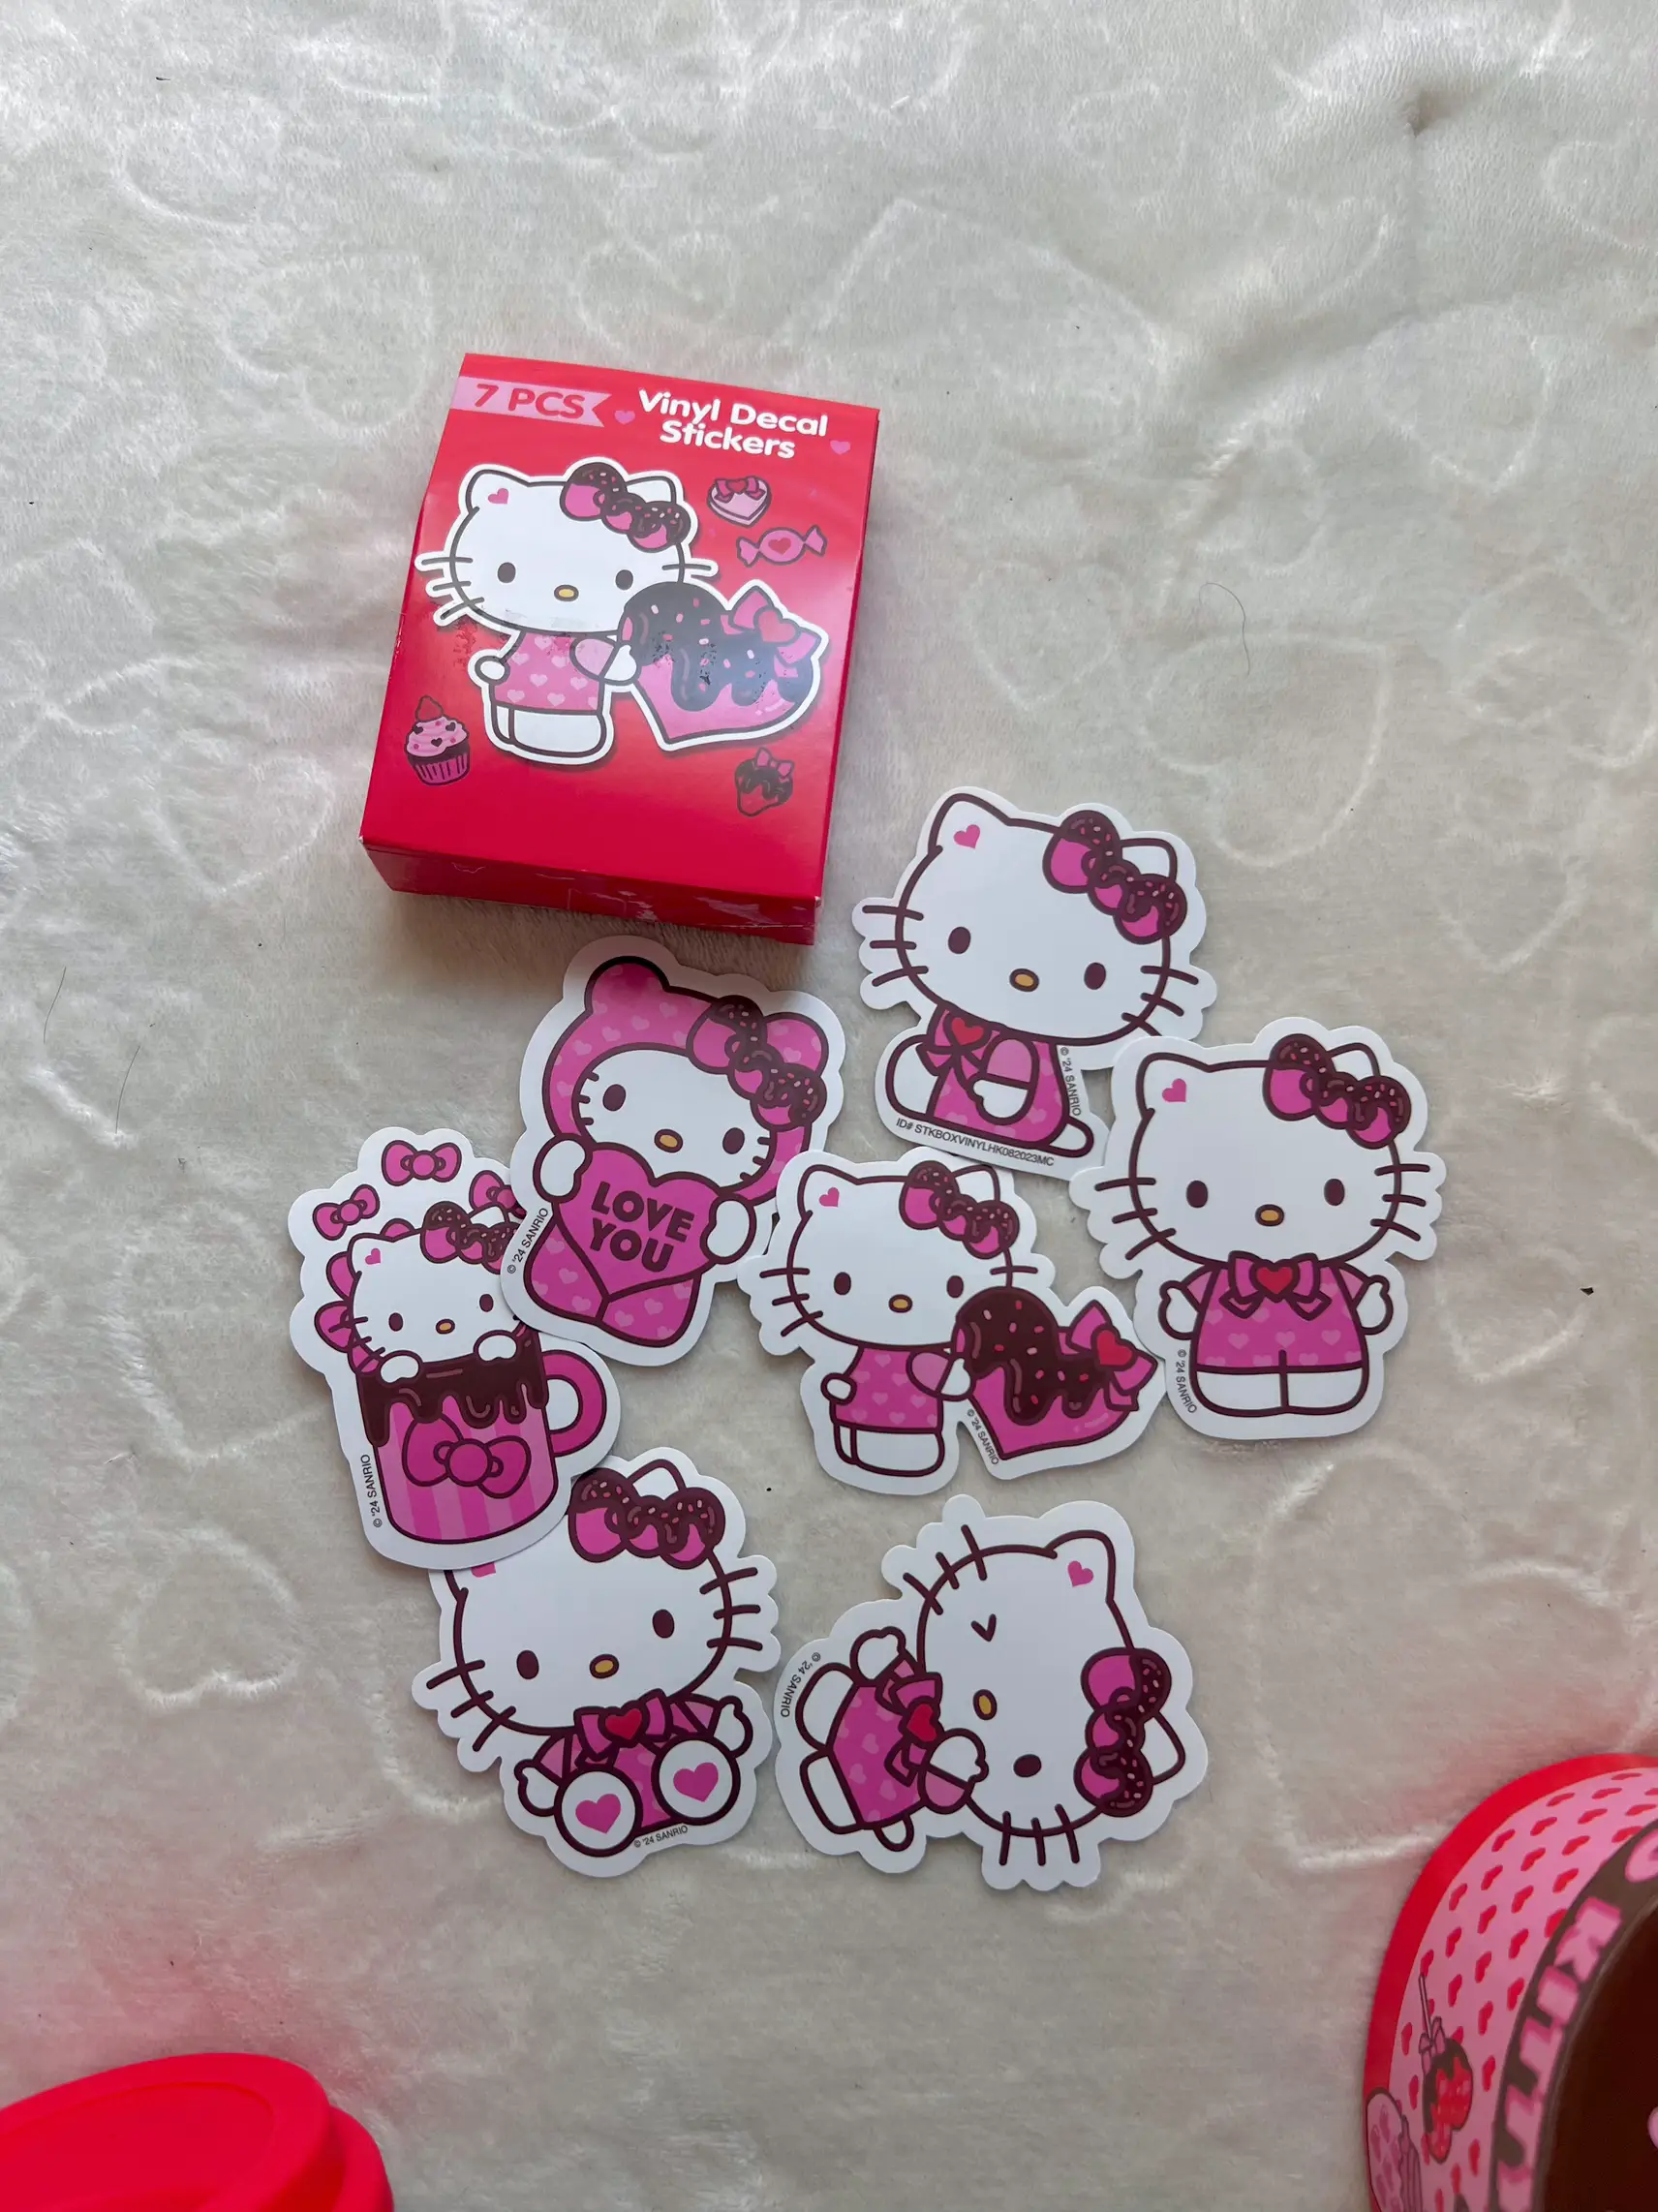 Hello Kitty Sticker Book with 200+ Stickers 